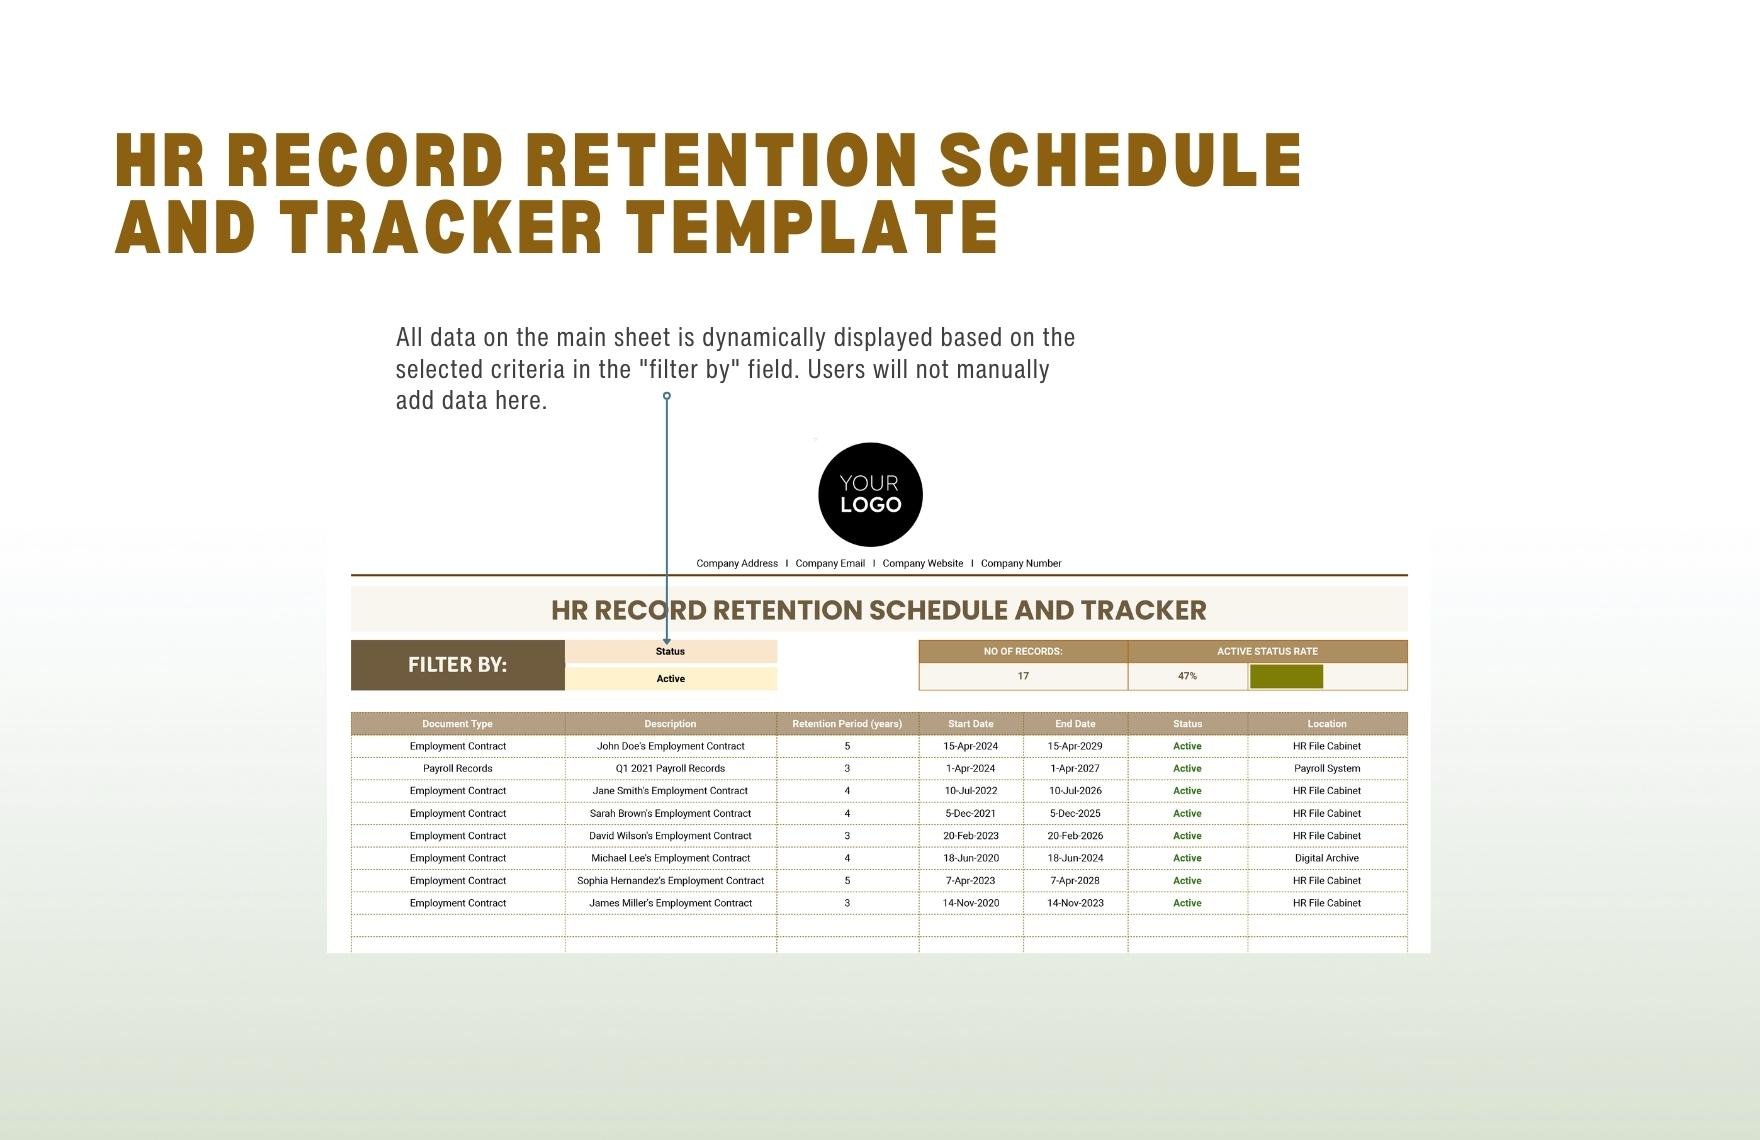 HR Record Retention Schedule and Tracker Template